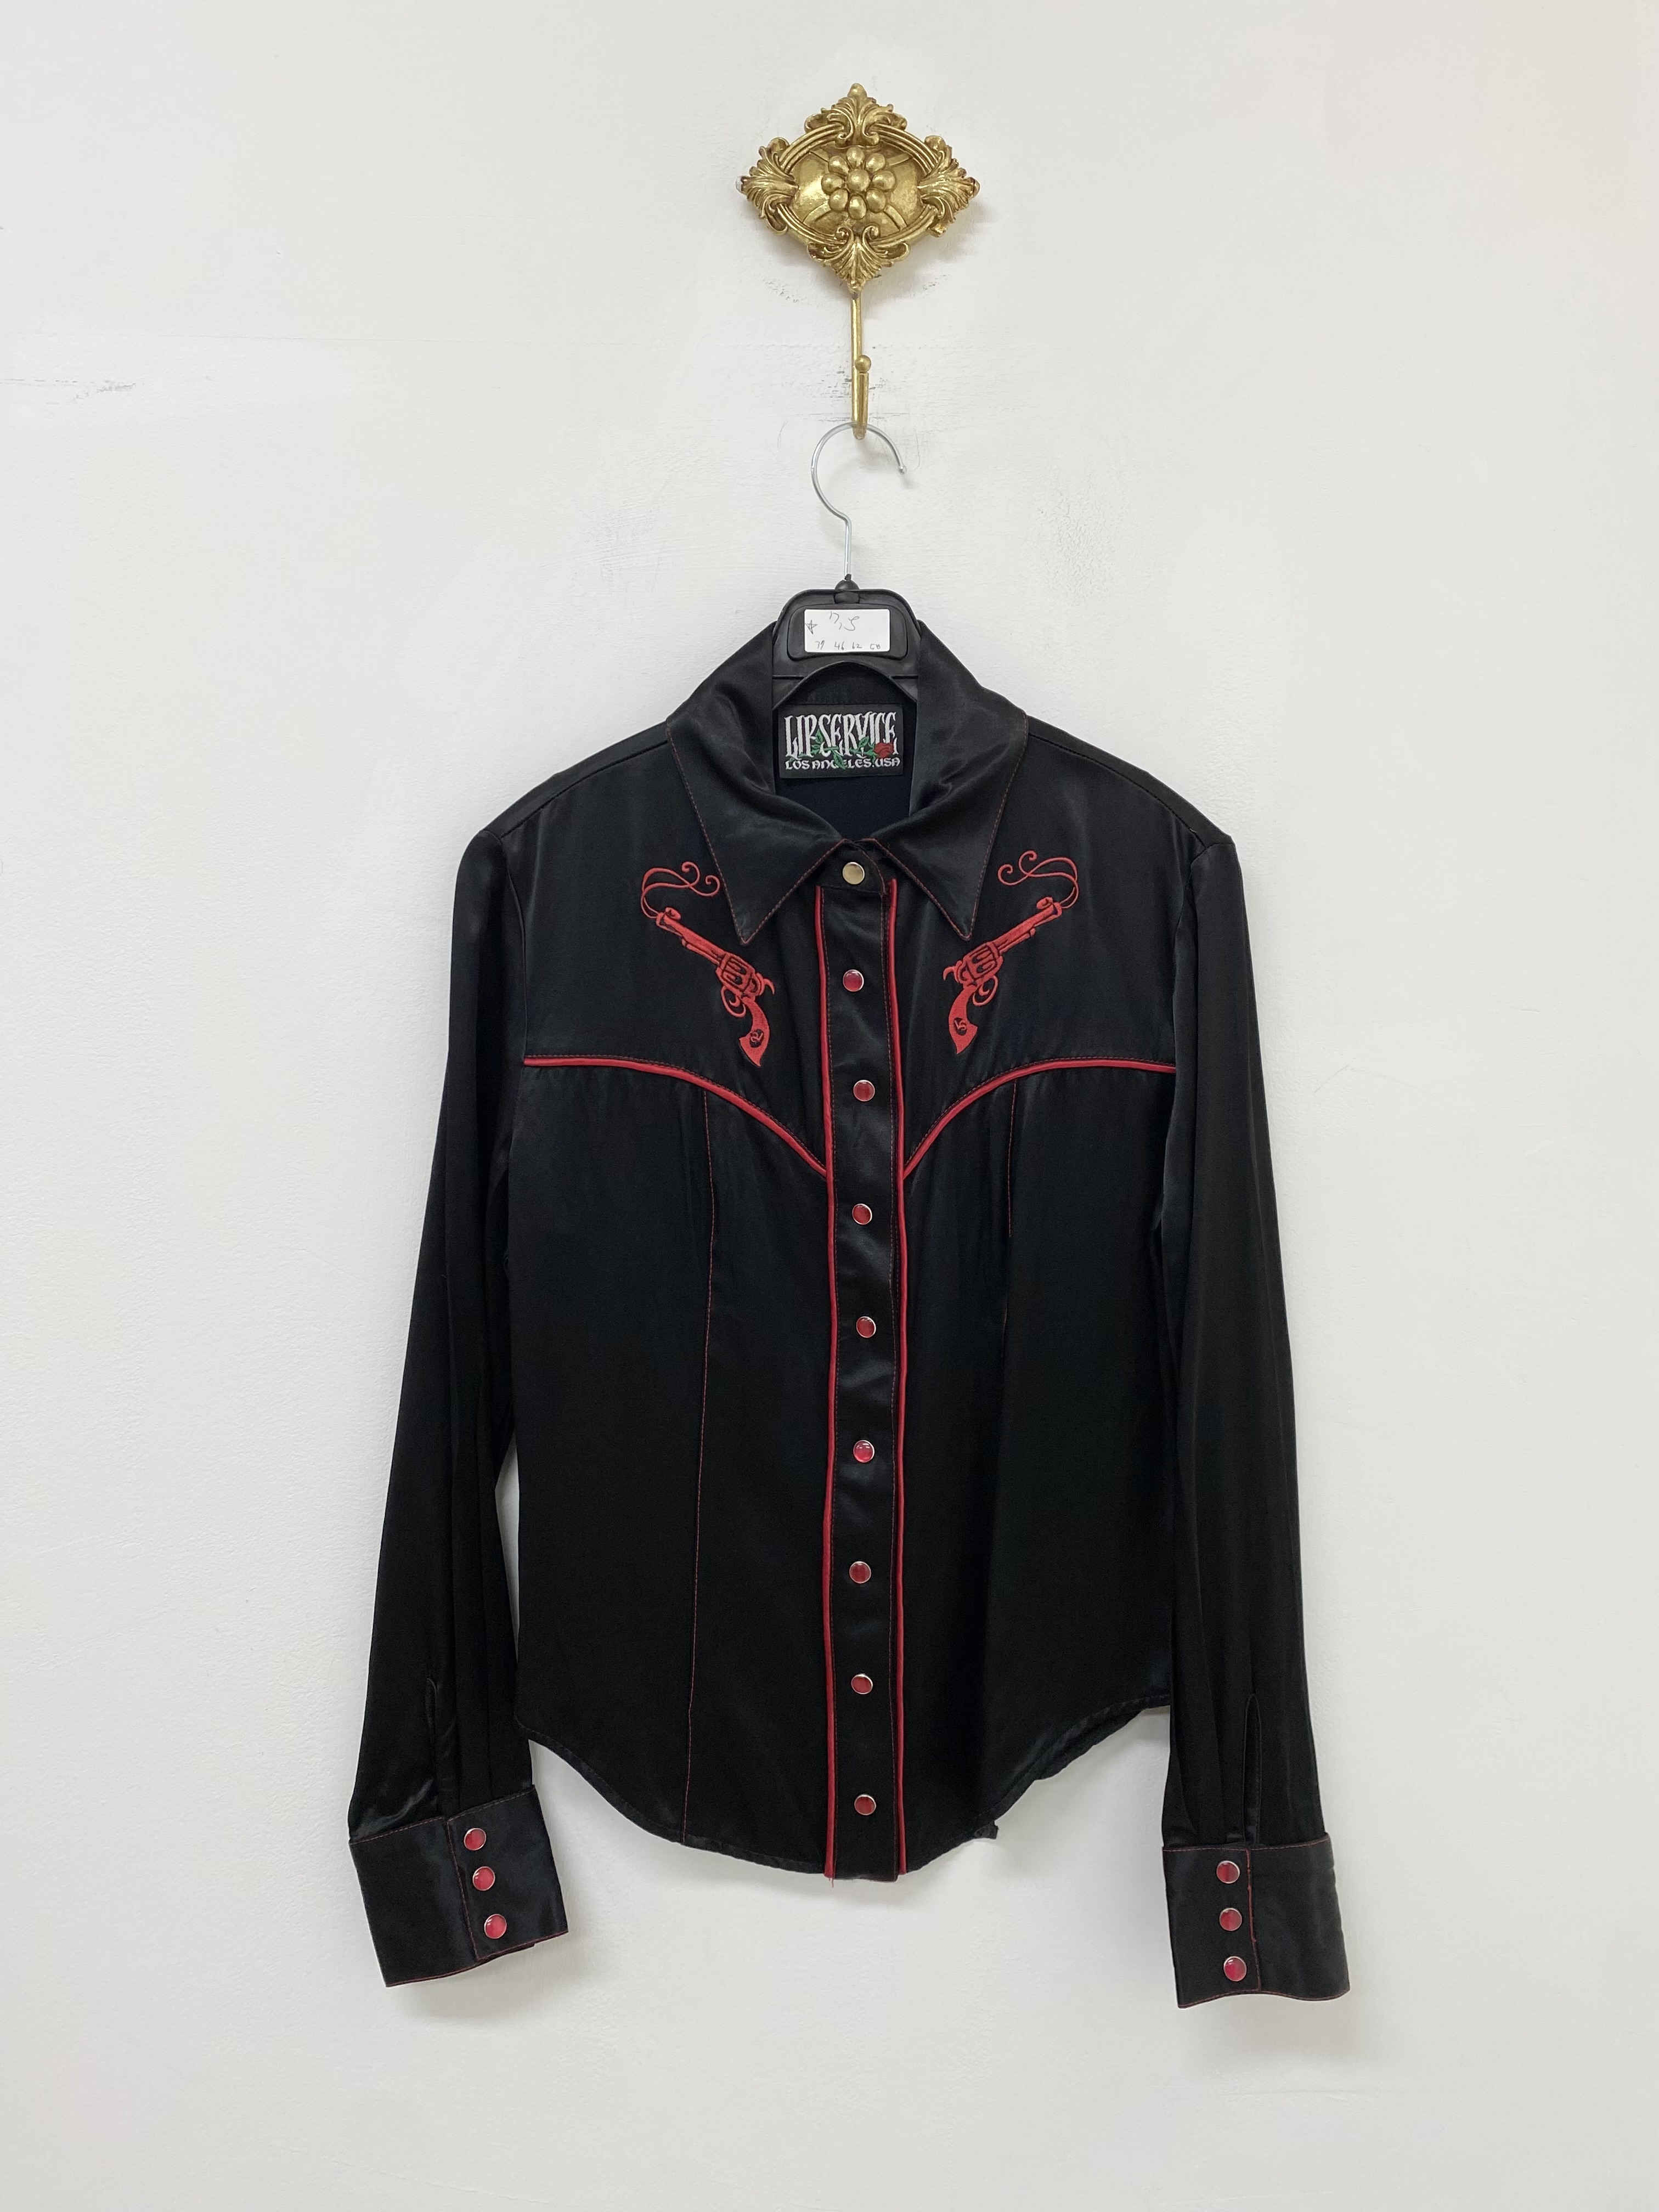 Lip Service black red embroidery point satin shirt (made in usa)